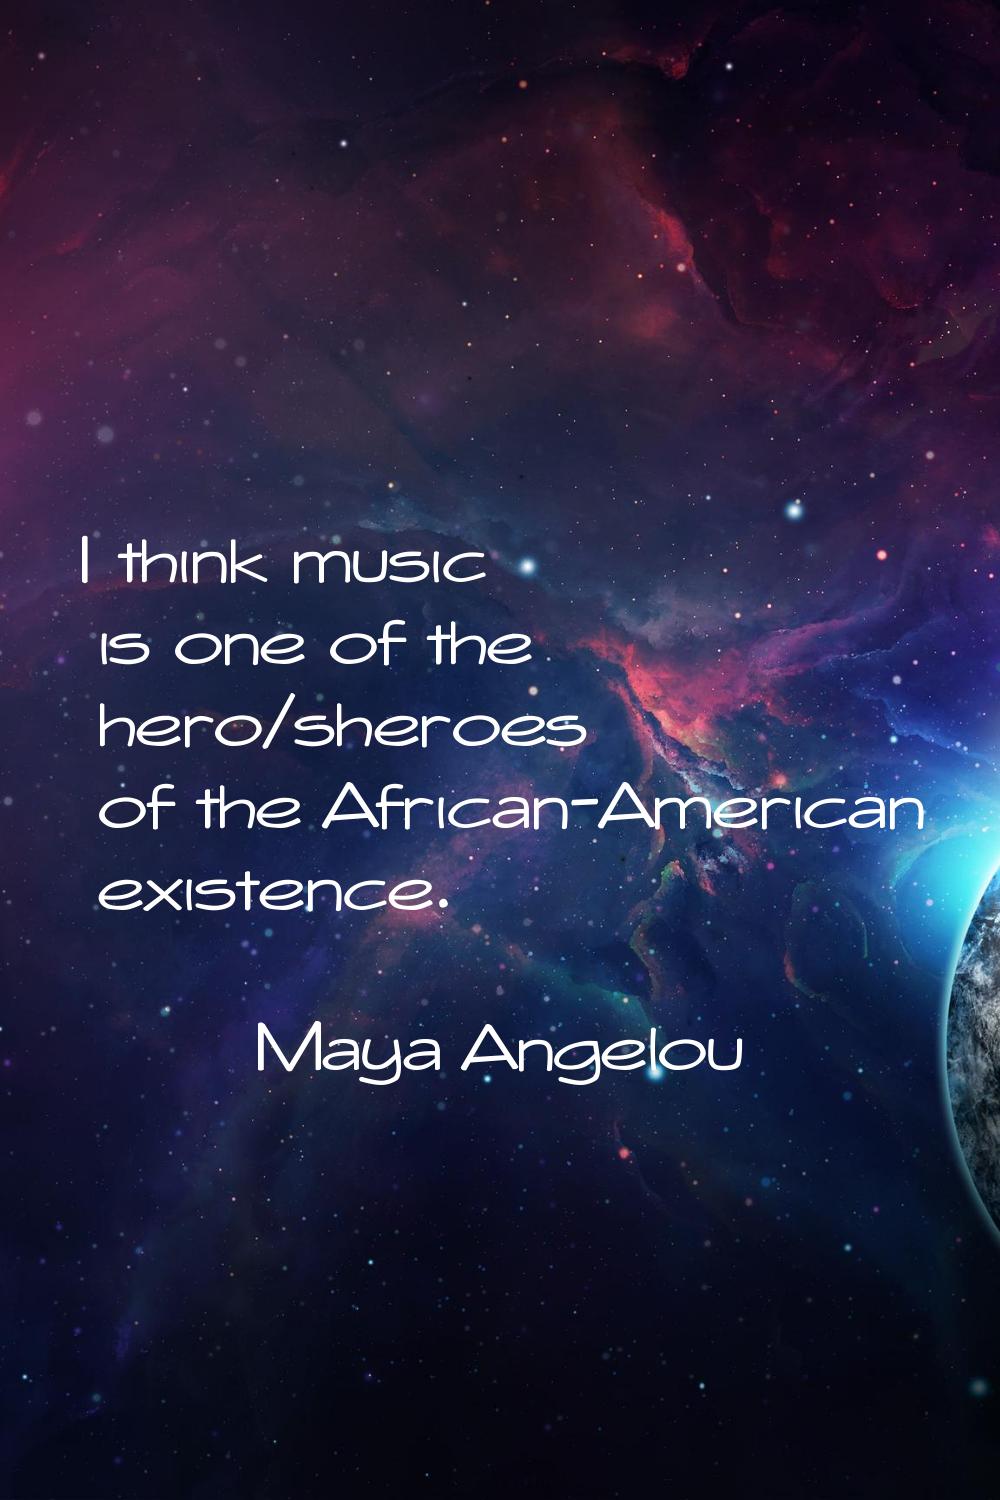 I think music is one of the hero/sheroes of the African-American existence.